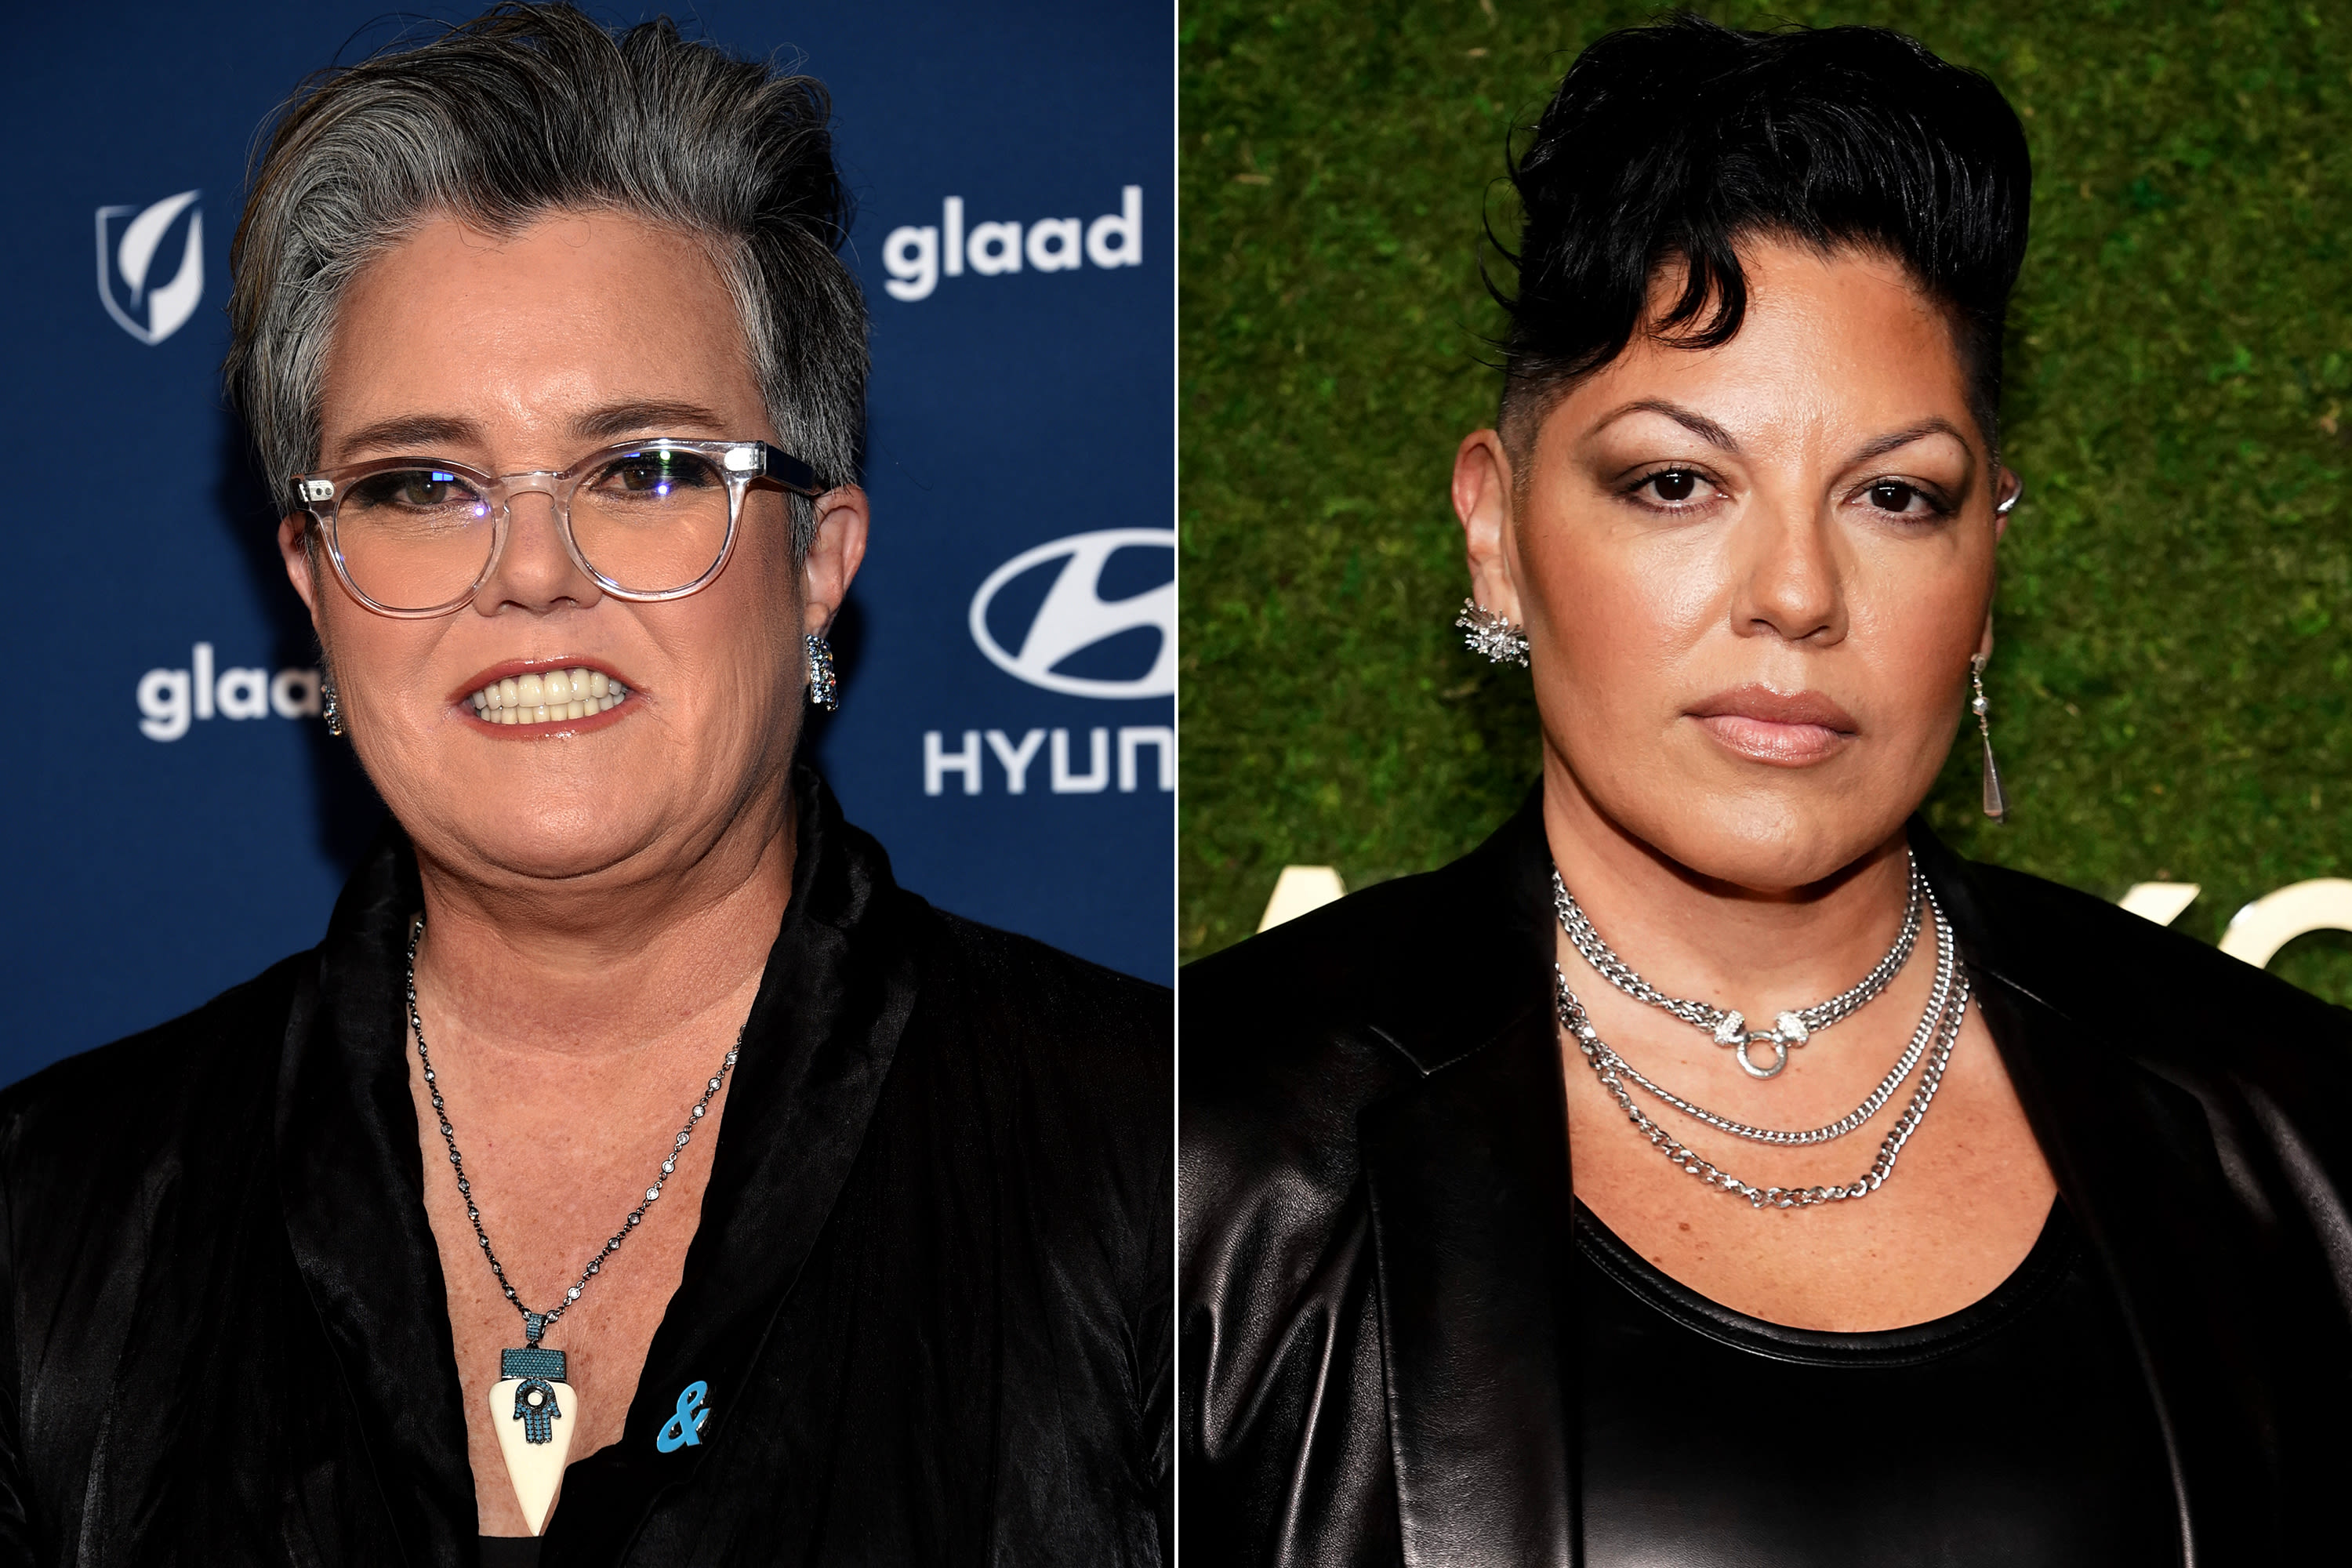 Rosie O'Donnell joins 'And Just Like That' for Season 3, and there's no sign of Sara Ramirez